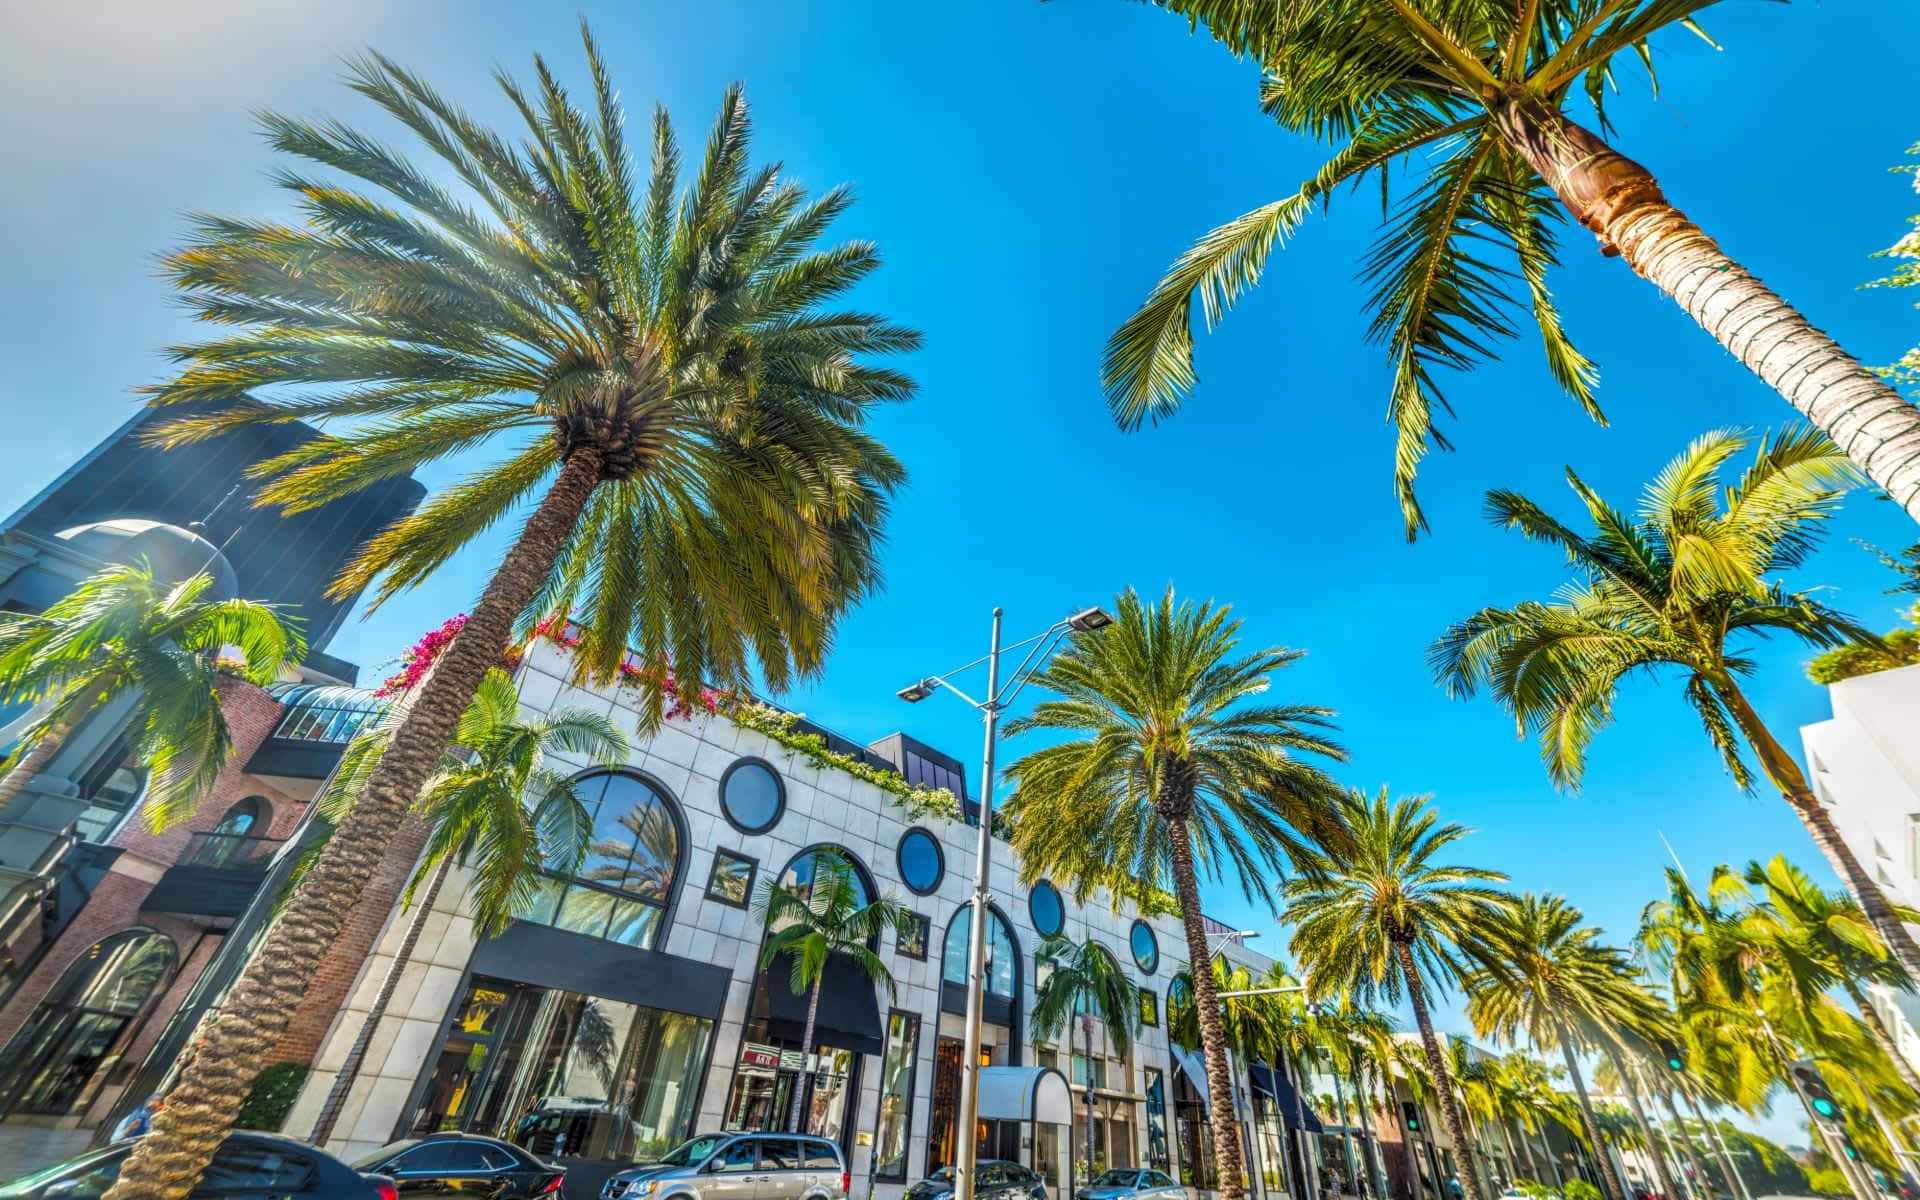 Download Beverly Hills Rodeo Drive Palm Trees Wallpaper | Wallpapers.com